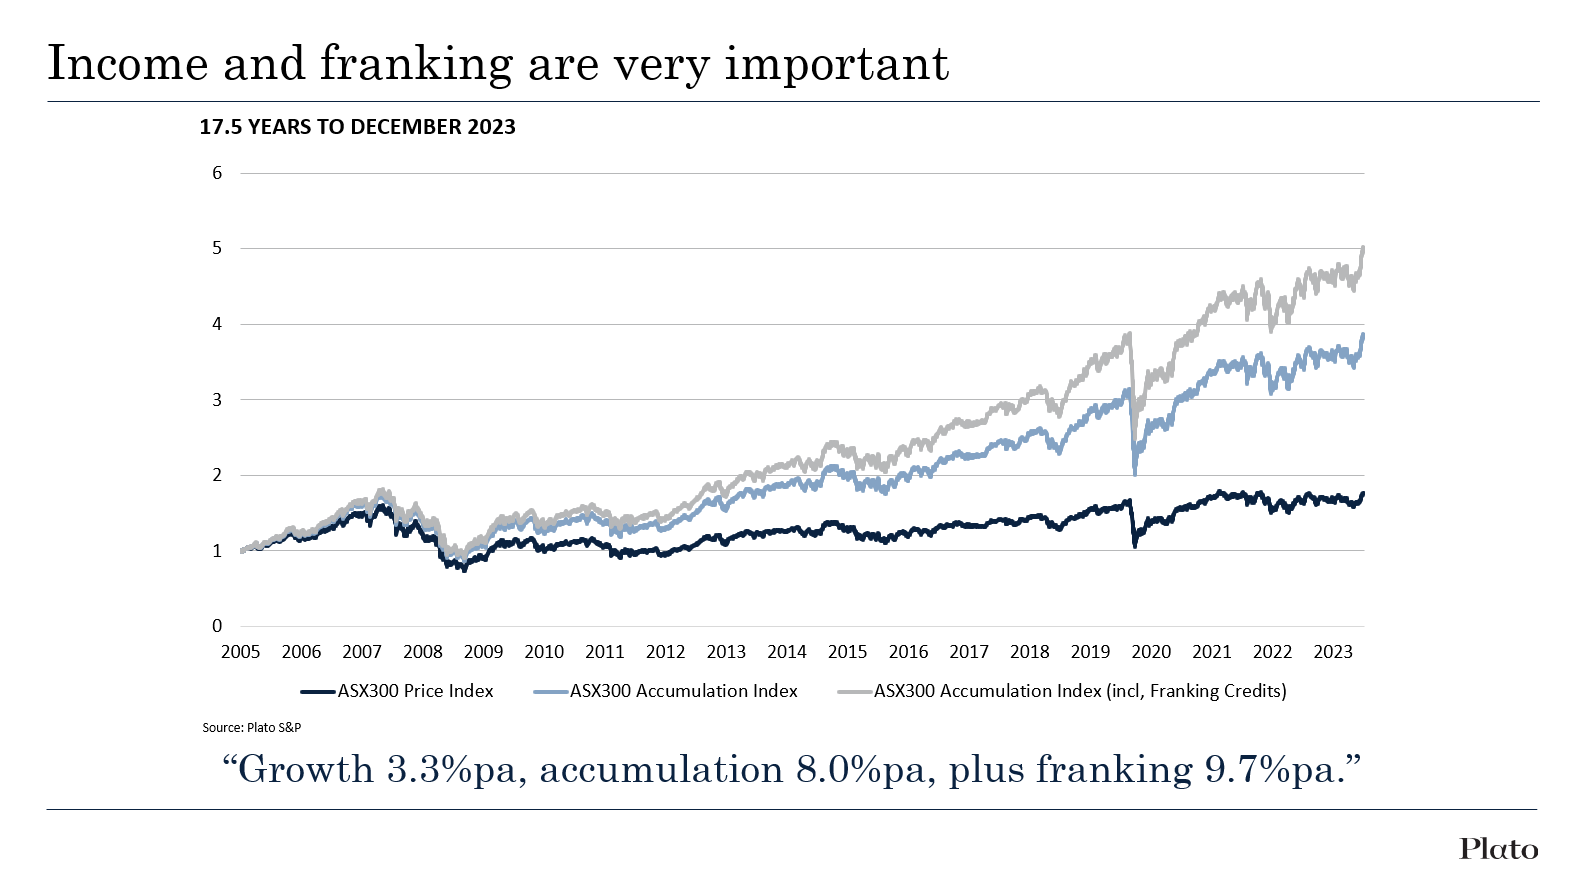 Image: The importance of income and franking